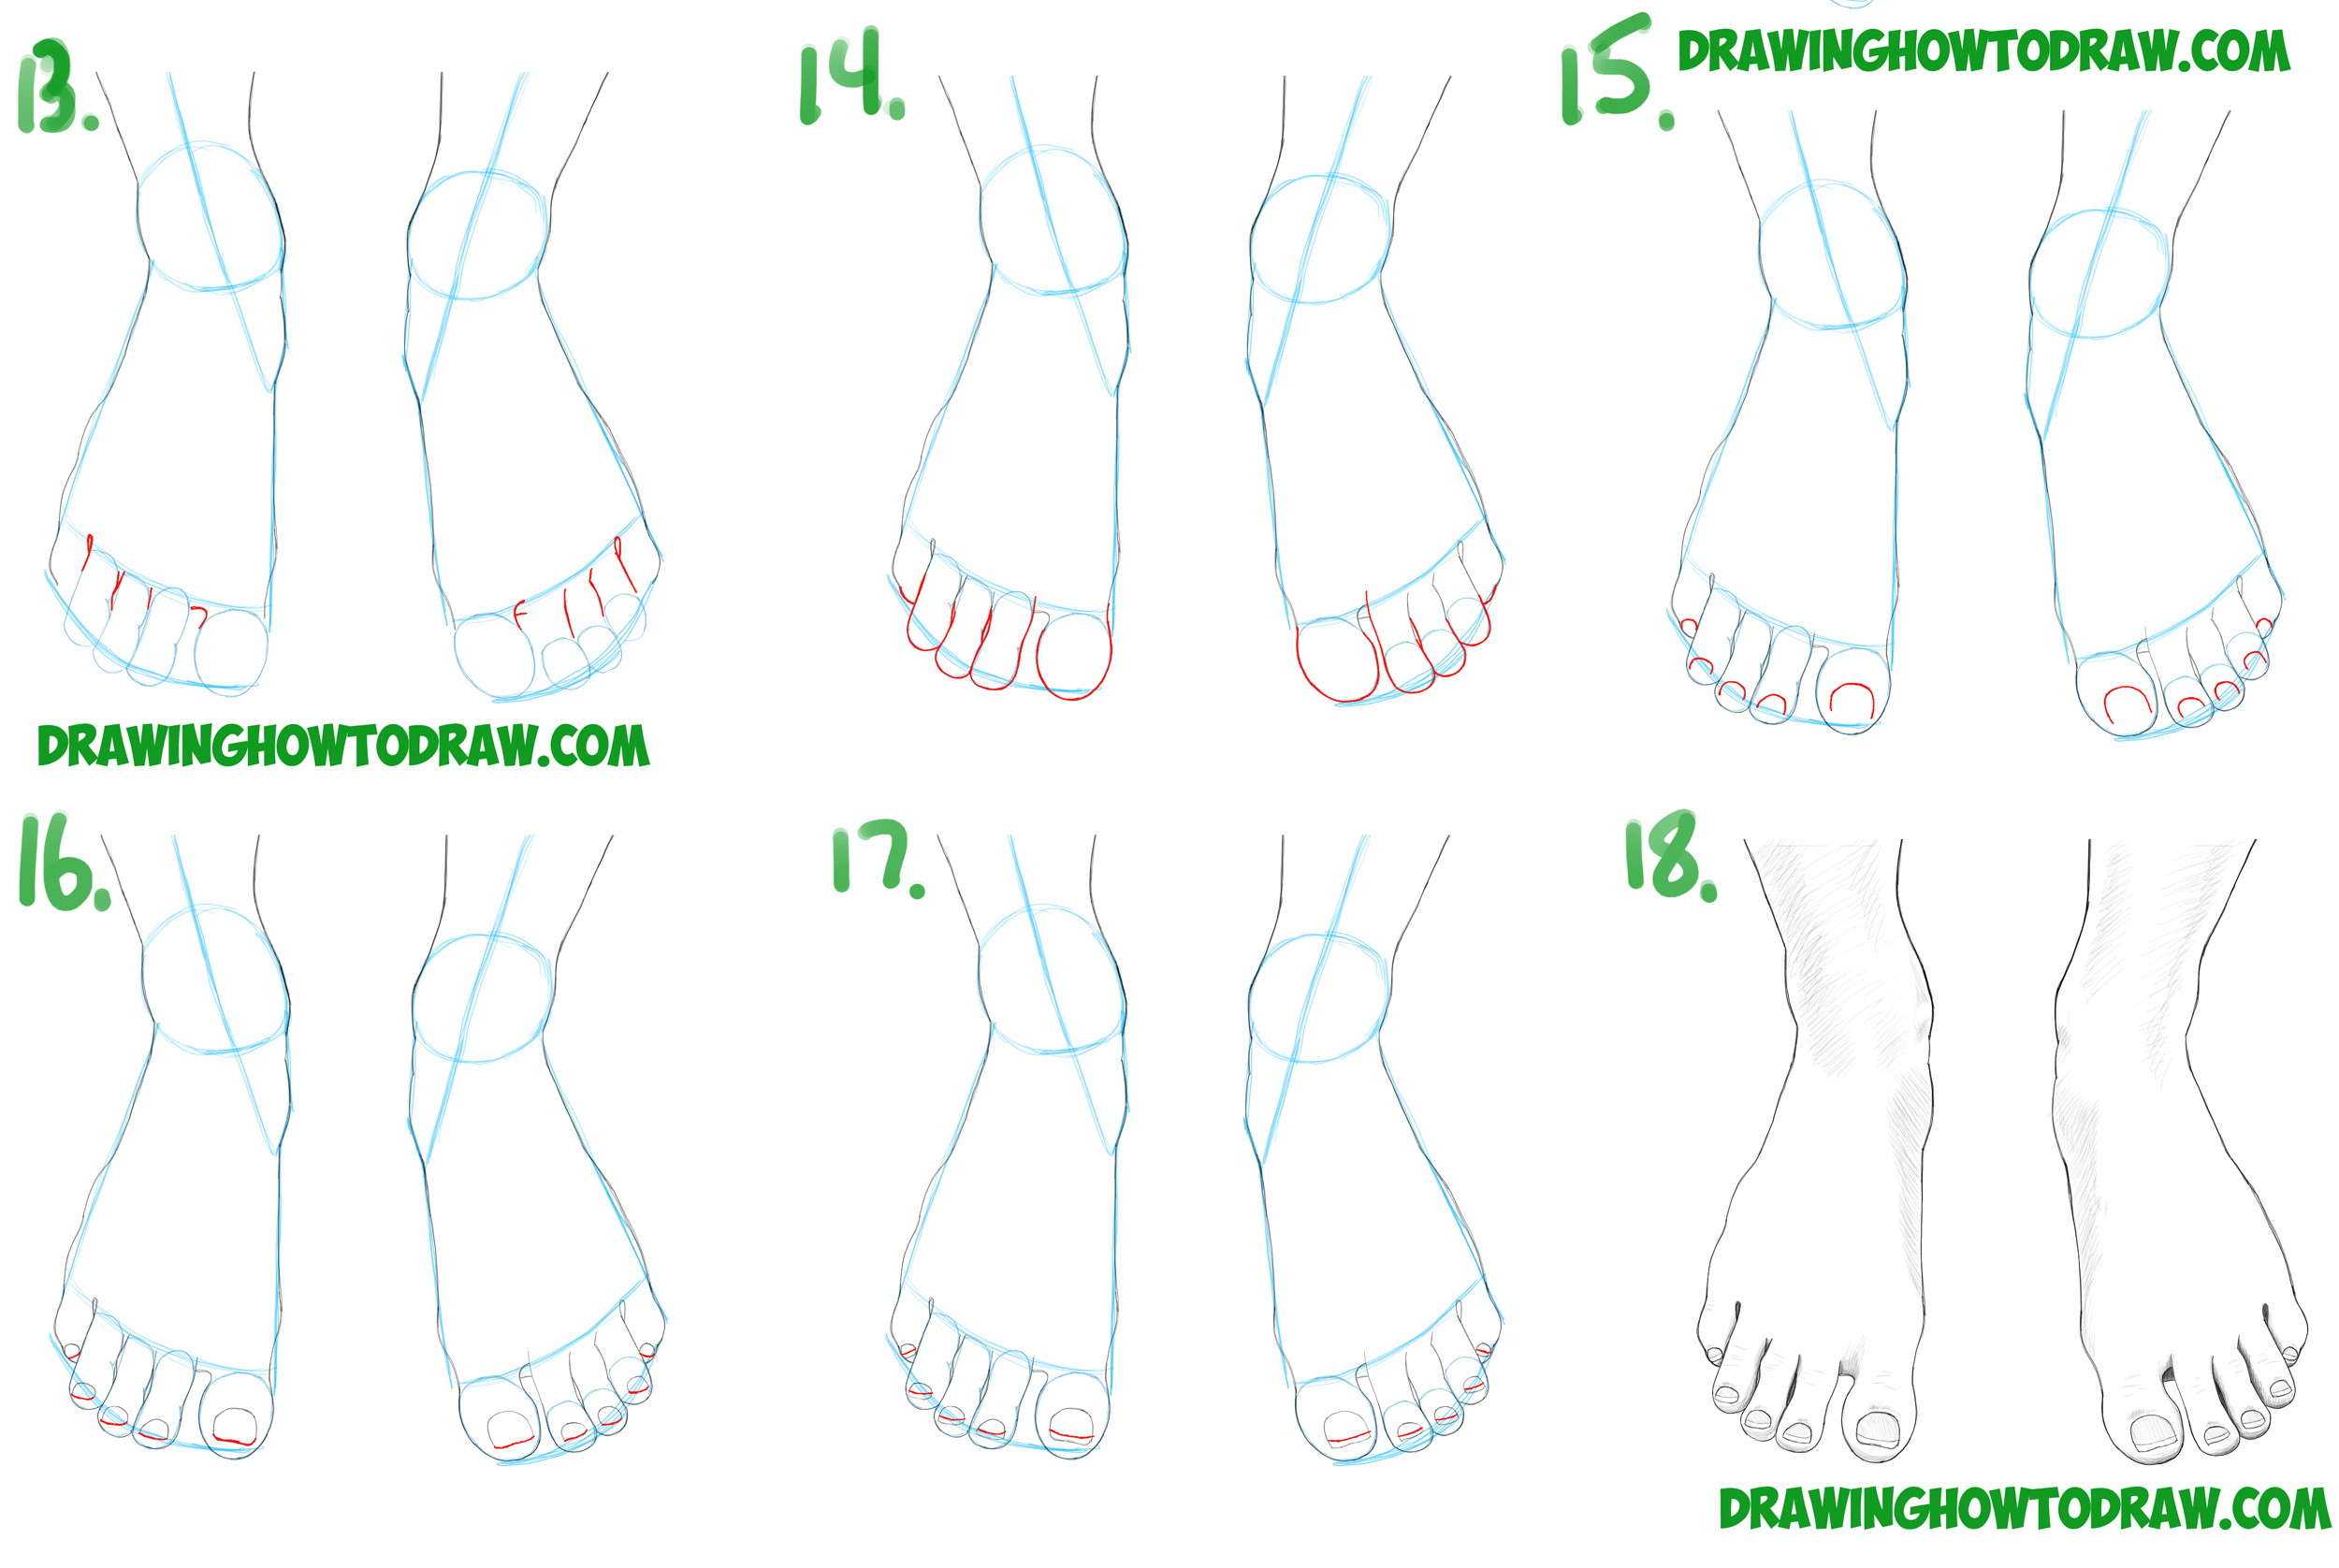 How to Draw Feet / the Human Foot with Easy Step by Step Drawing